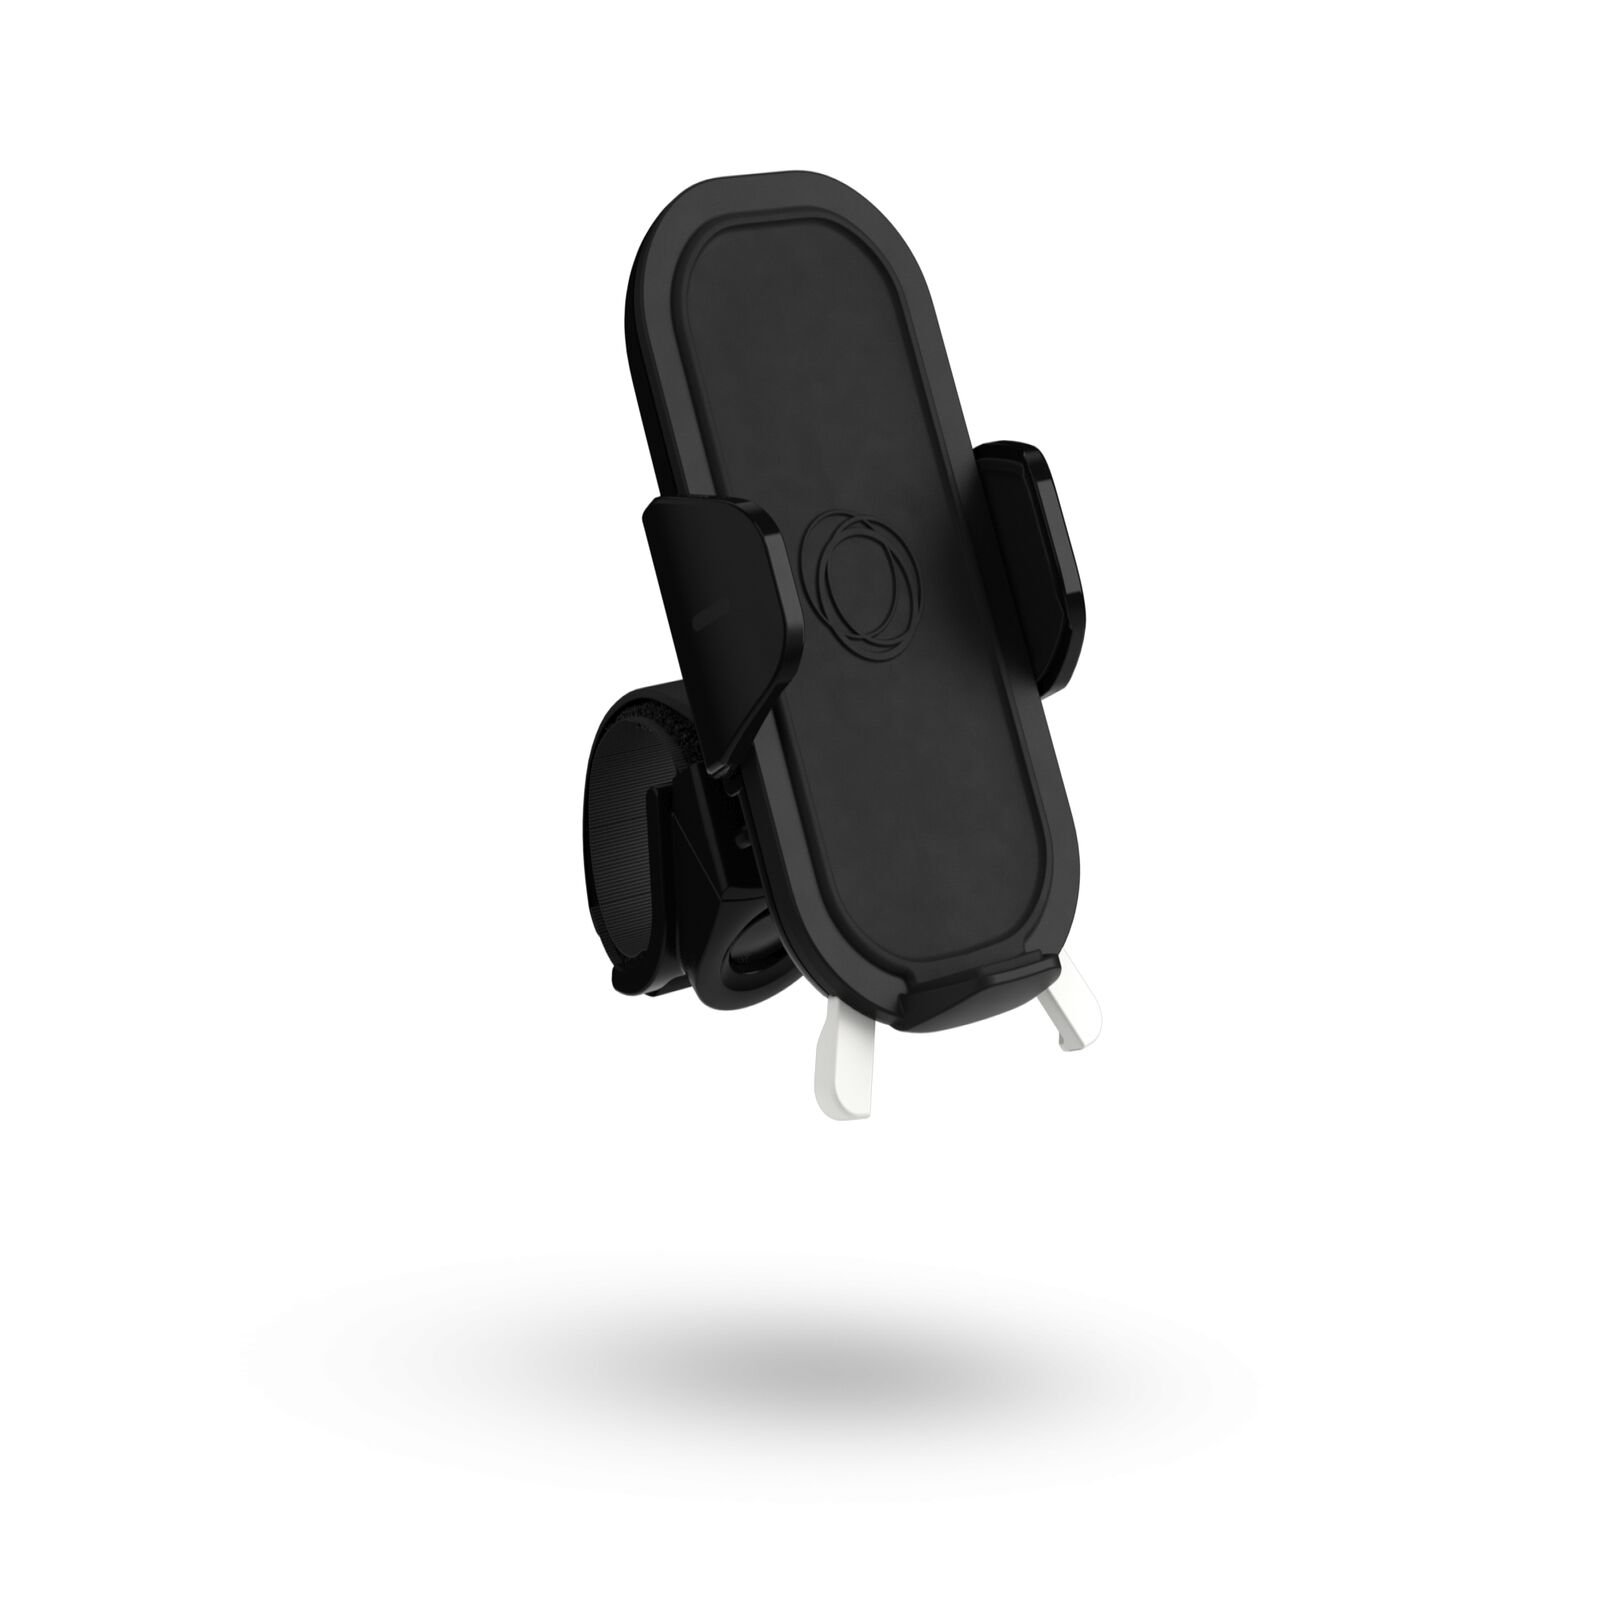 Bugaboo support smartphone - View 2